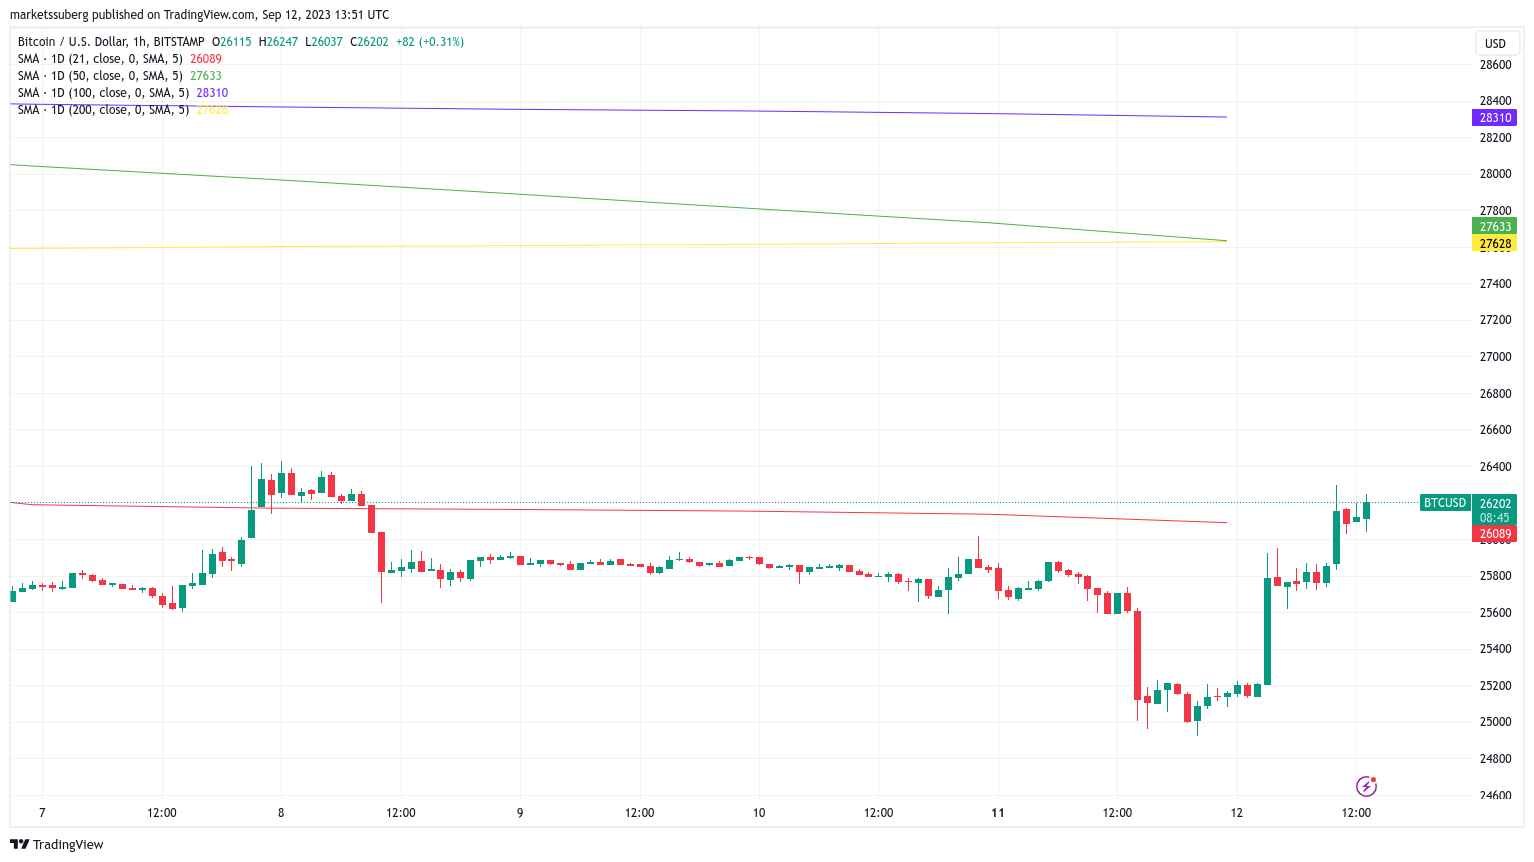 A one-hour chart for BTC/USD displaying 21, 50, 100, and 200-day moving averages, sourced from TradingView